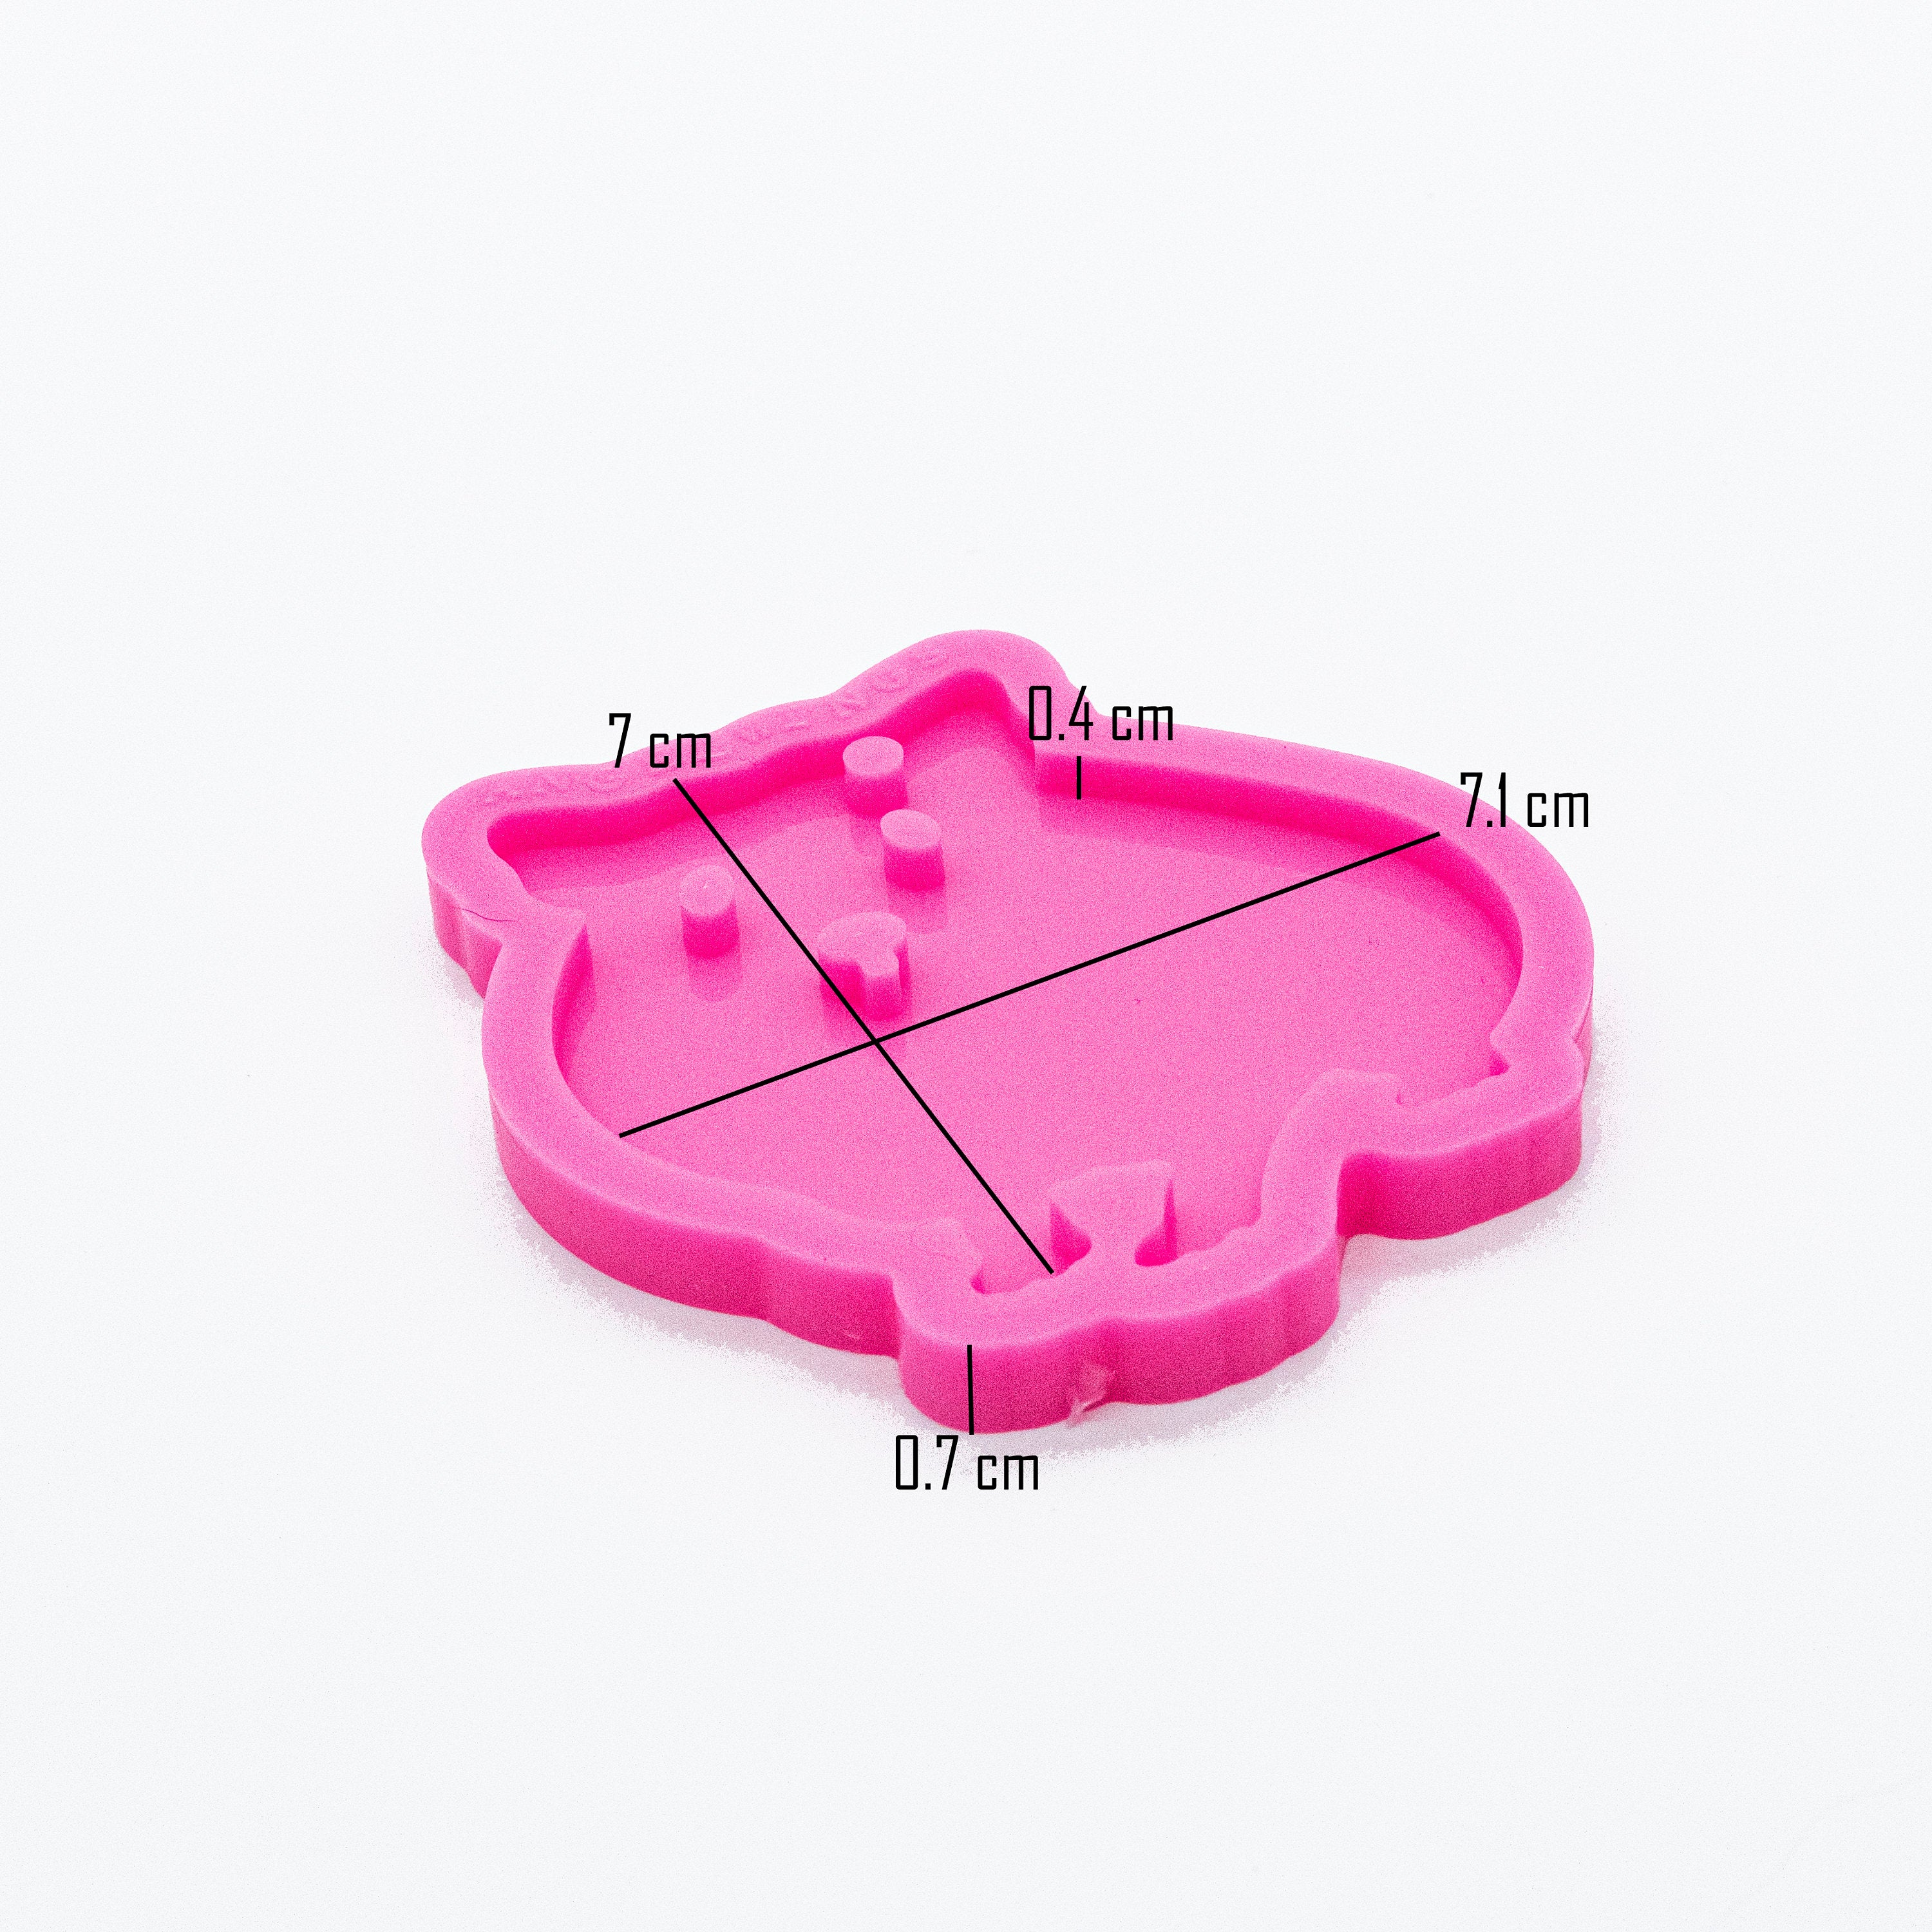 Hamster/Guinea Pig Shiny Silicone Mold for Epoxy Resin Keychain - Jewelry Making - Ornament Silicone Mold